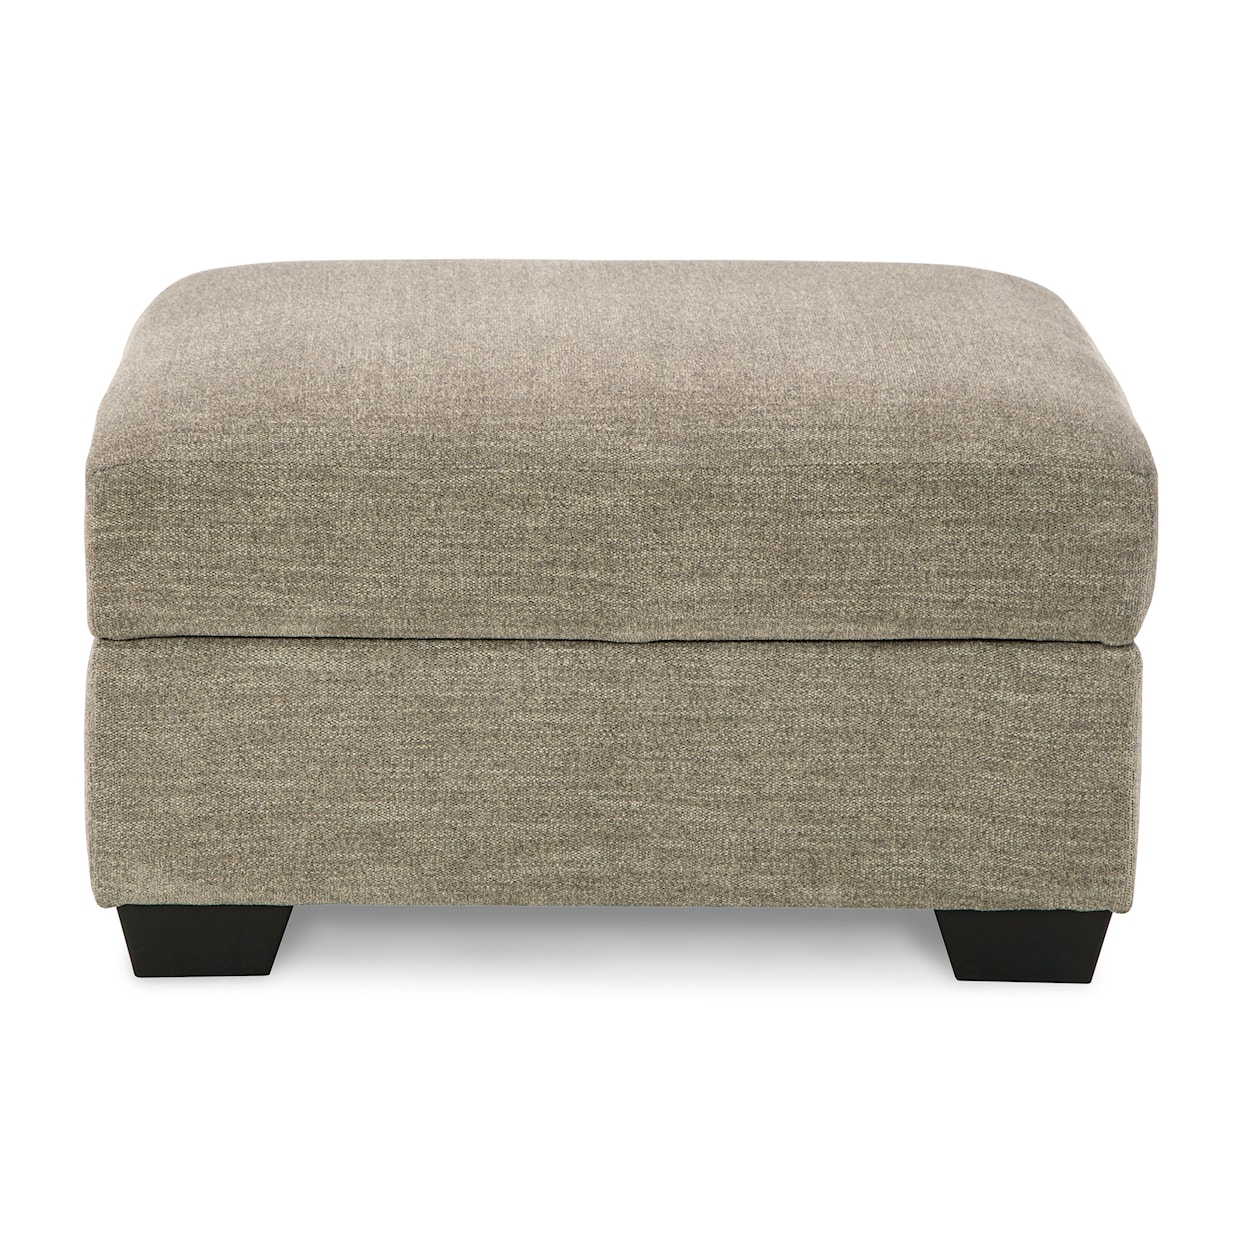 Signature Design by Ashley Creswell Ottoman With Storage